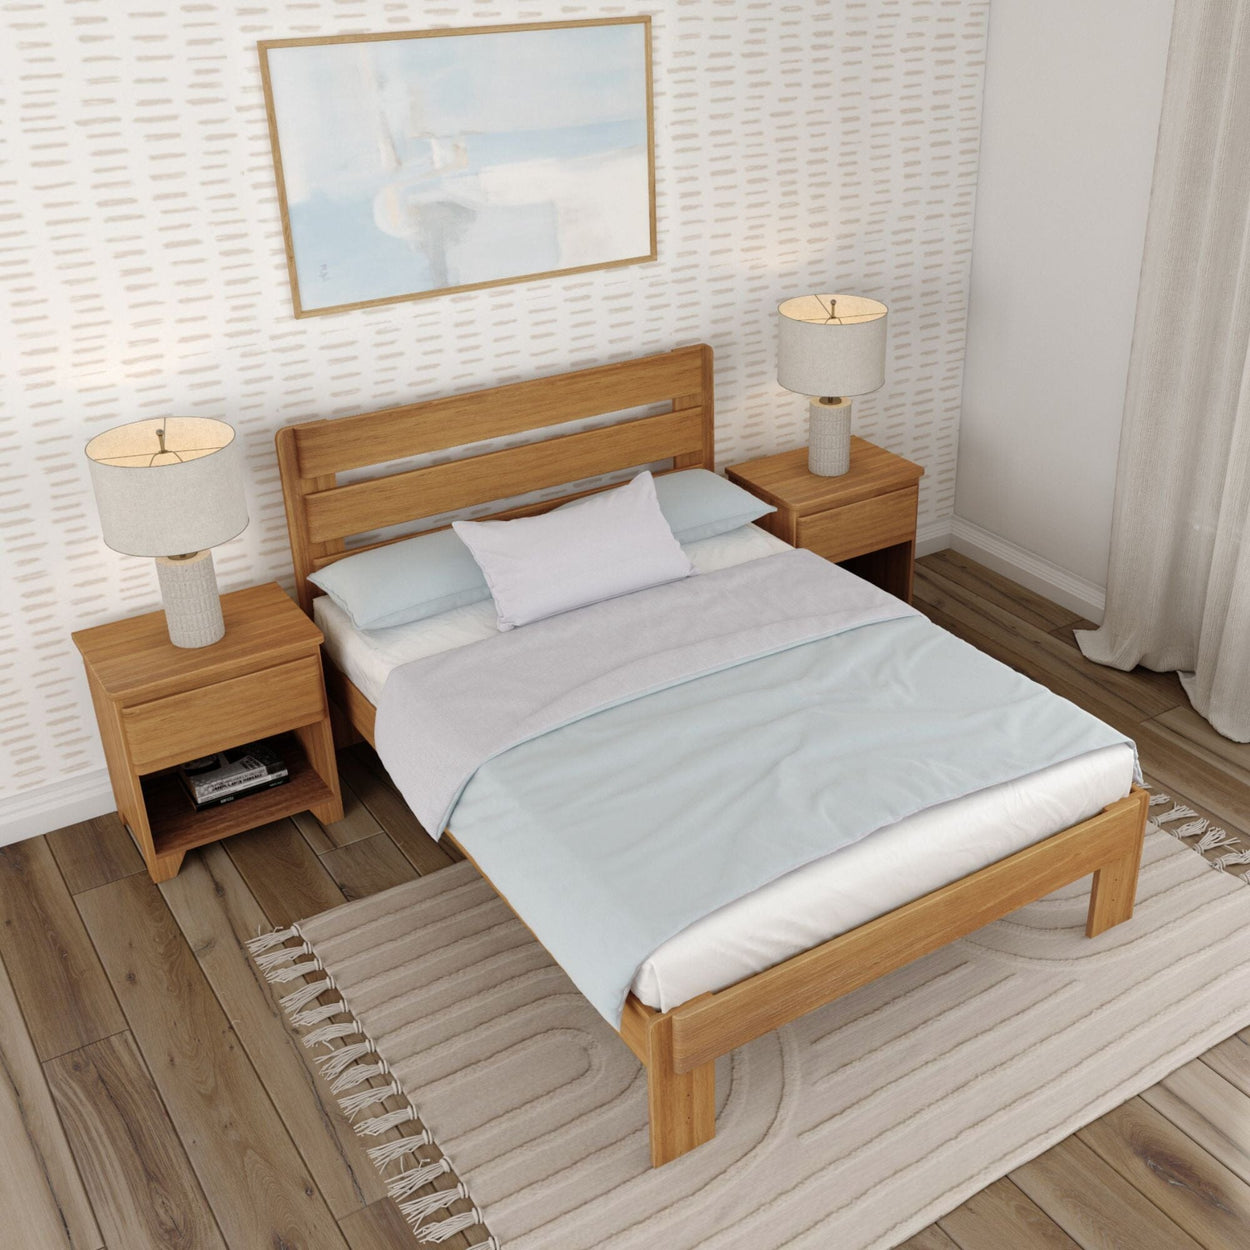 Rustic Queen Bed with Slatted Headboard Single Beds Plank+Beam 